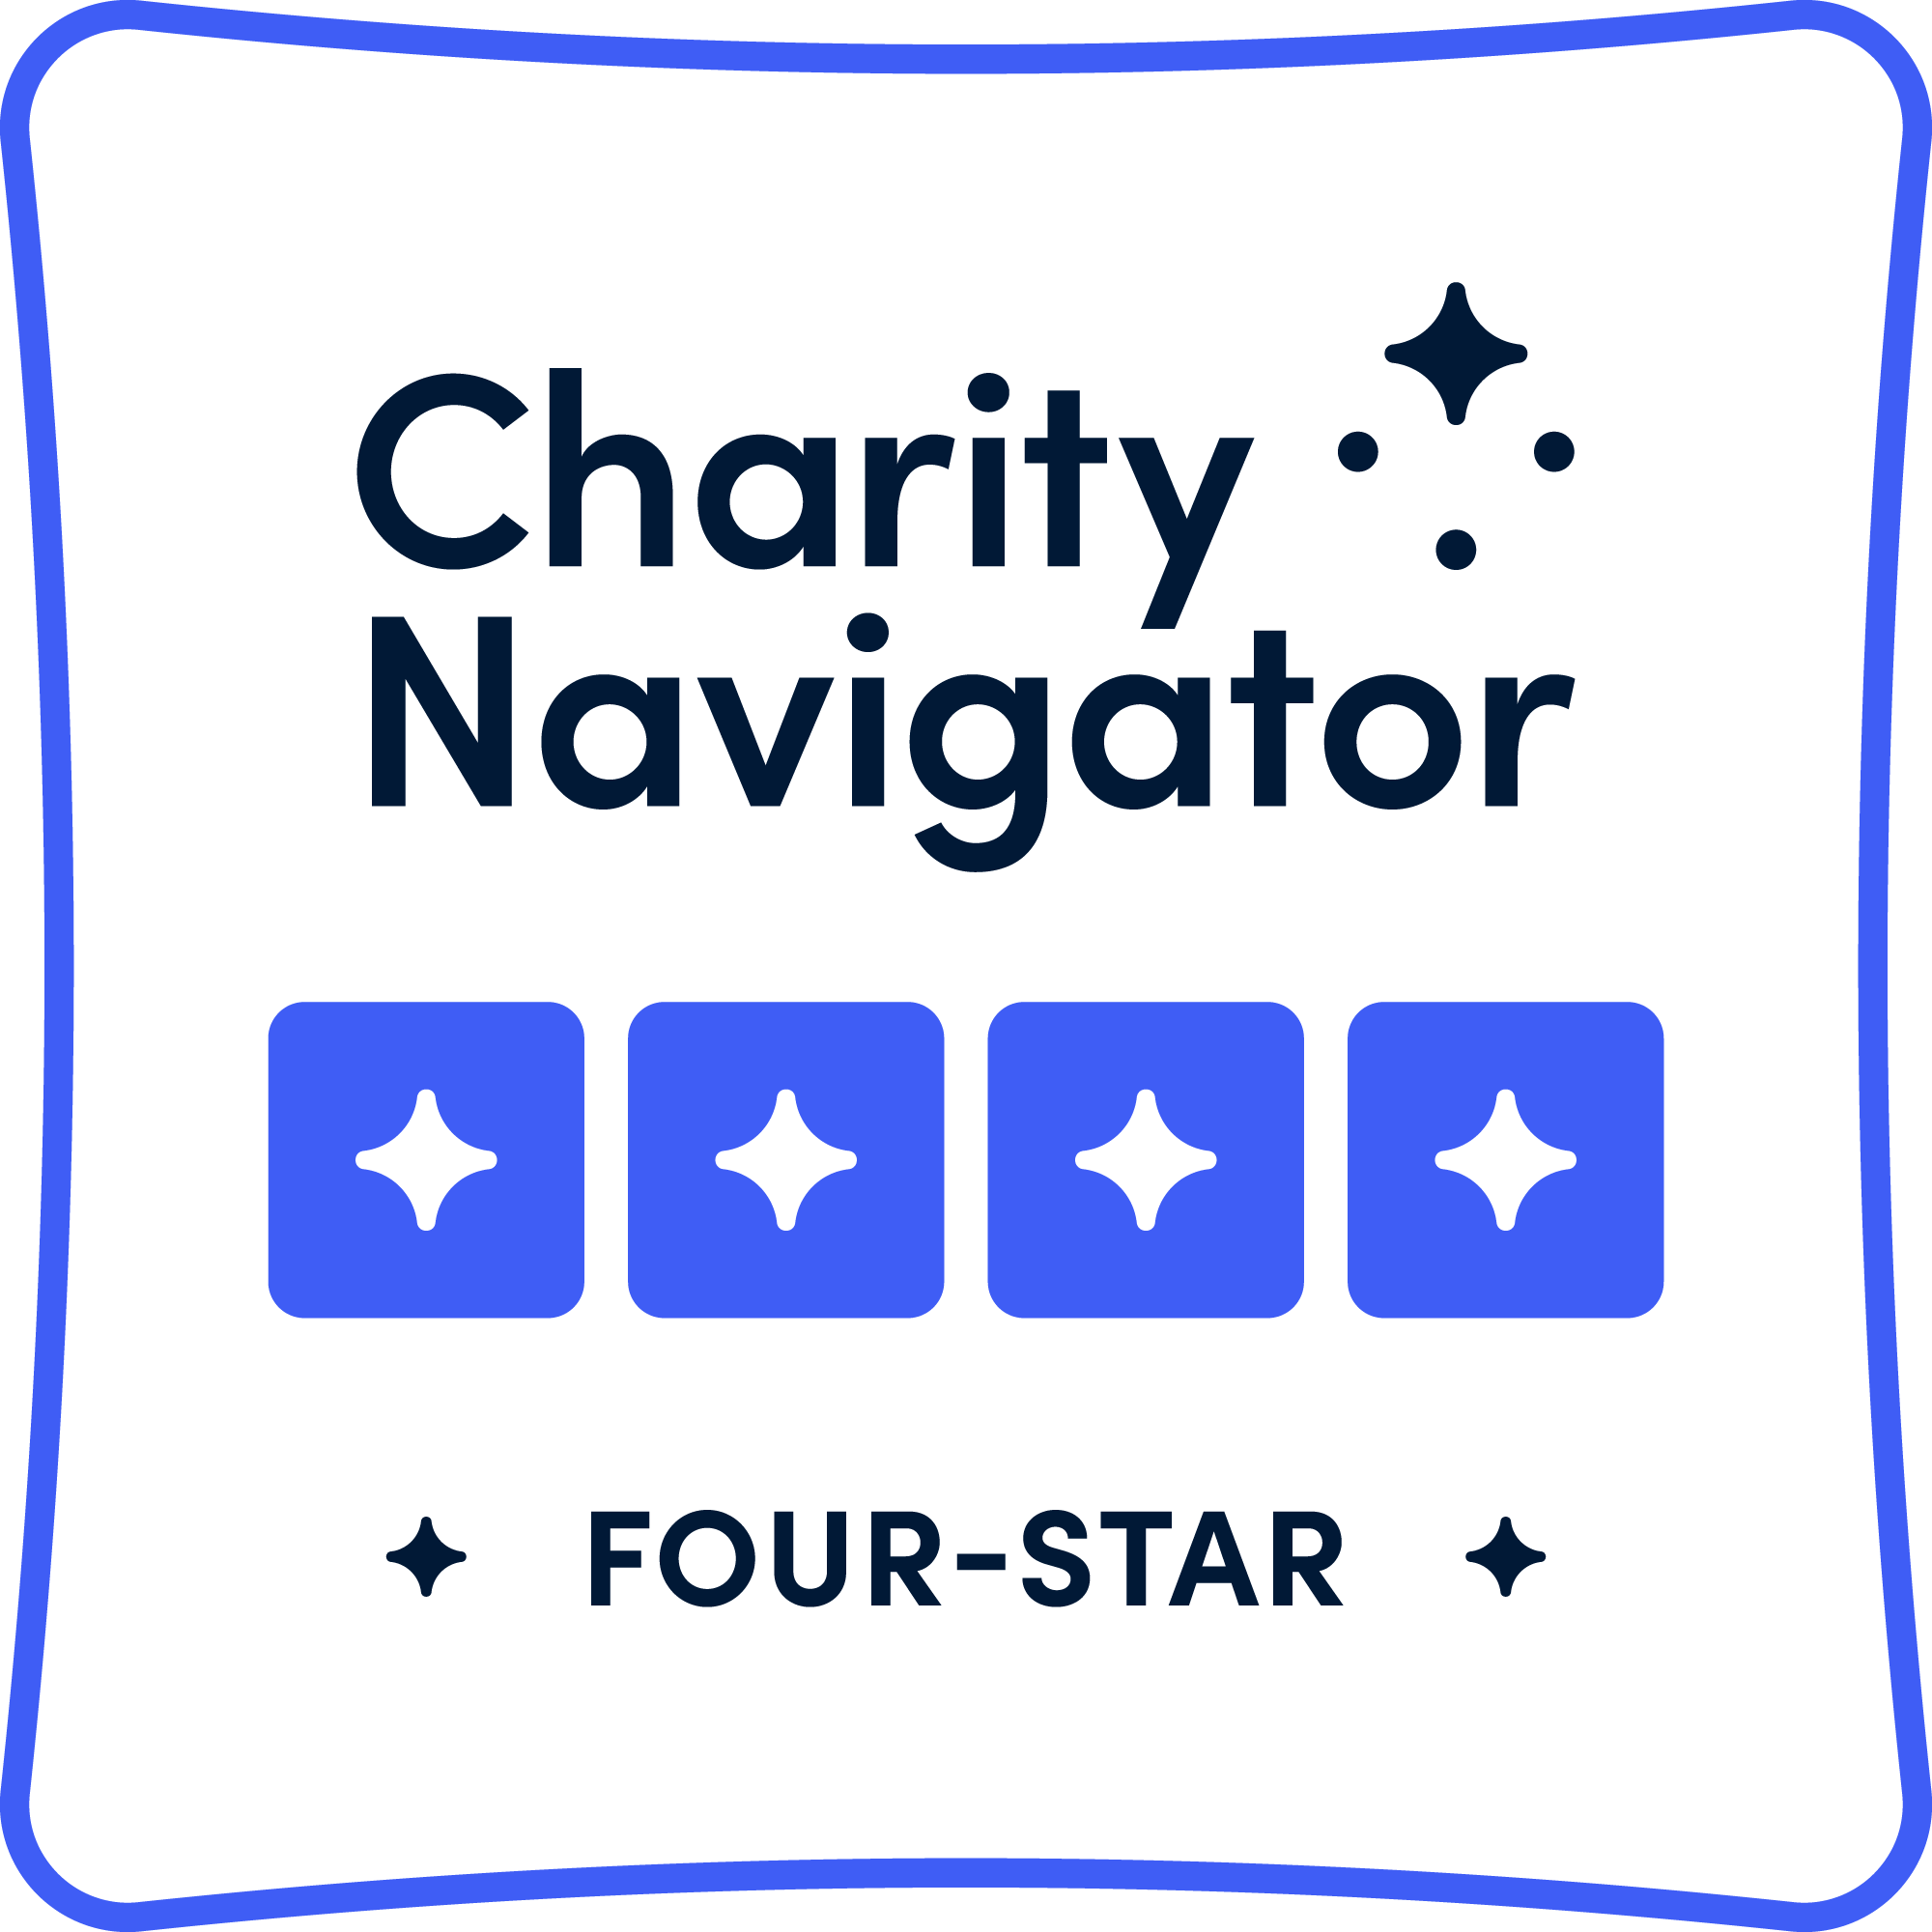 Logo featuring "Charity Navigator" with three small star icons above, four blue squares each with a white star below, and the text "FOUR-STAR" at the bottom.